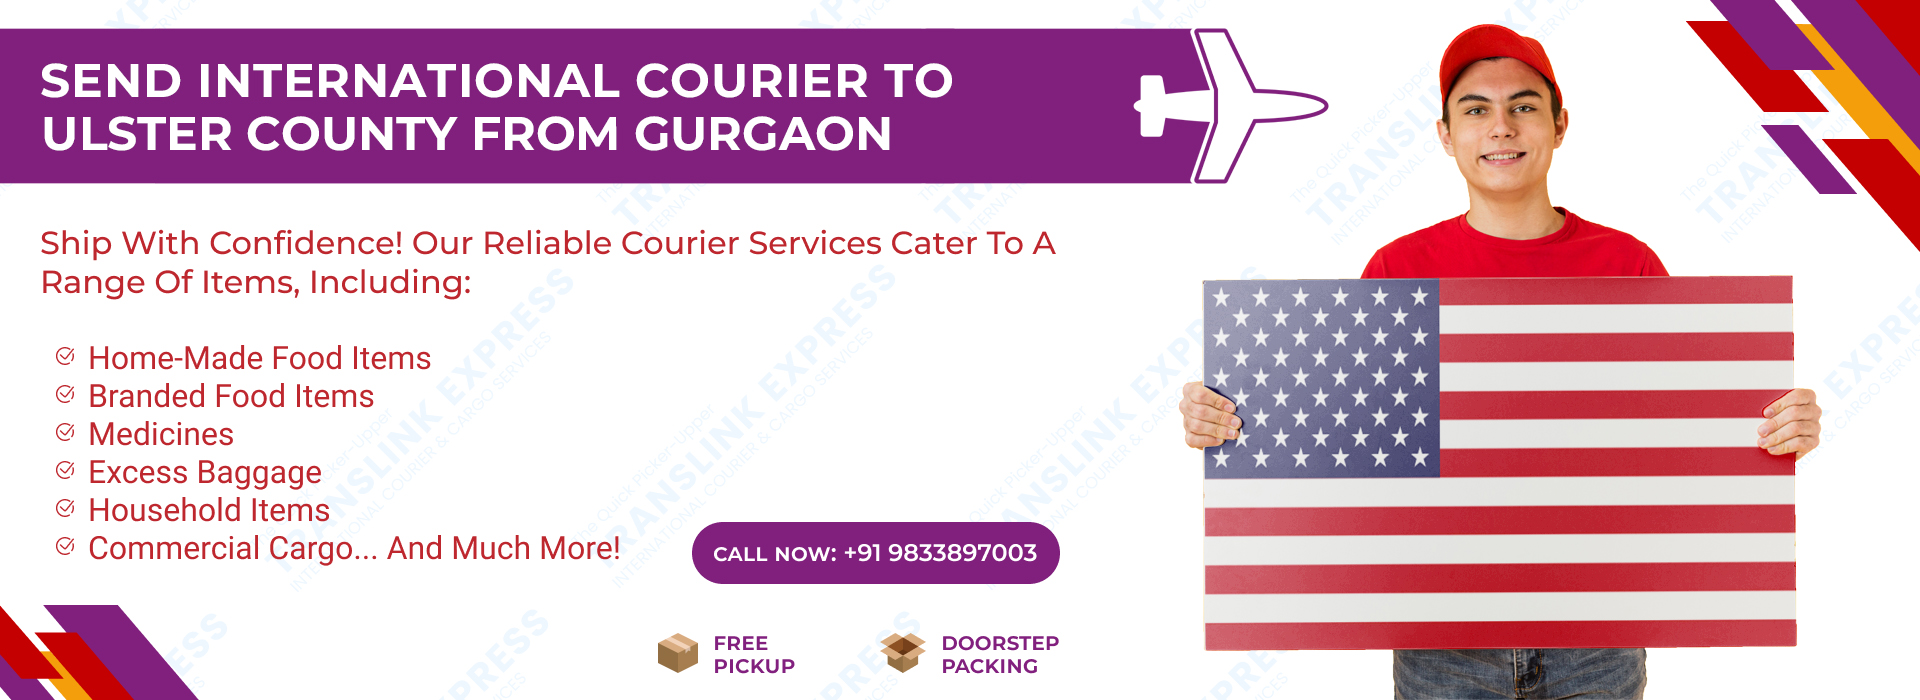 Courier to Ulster County From Gurgaon